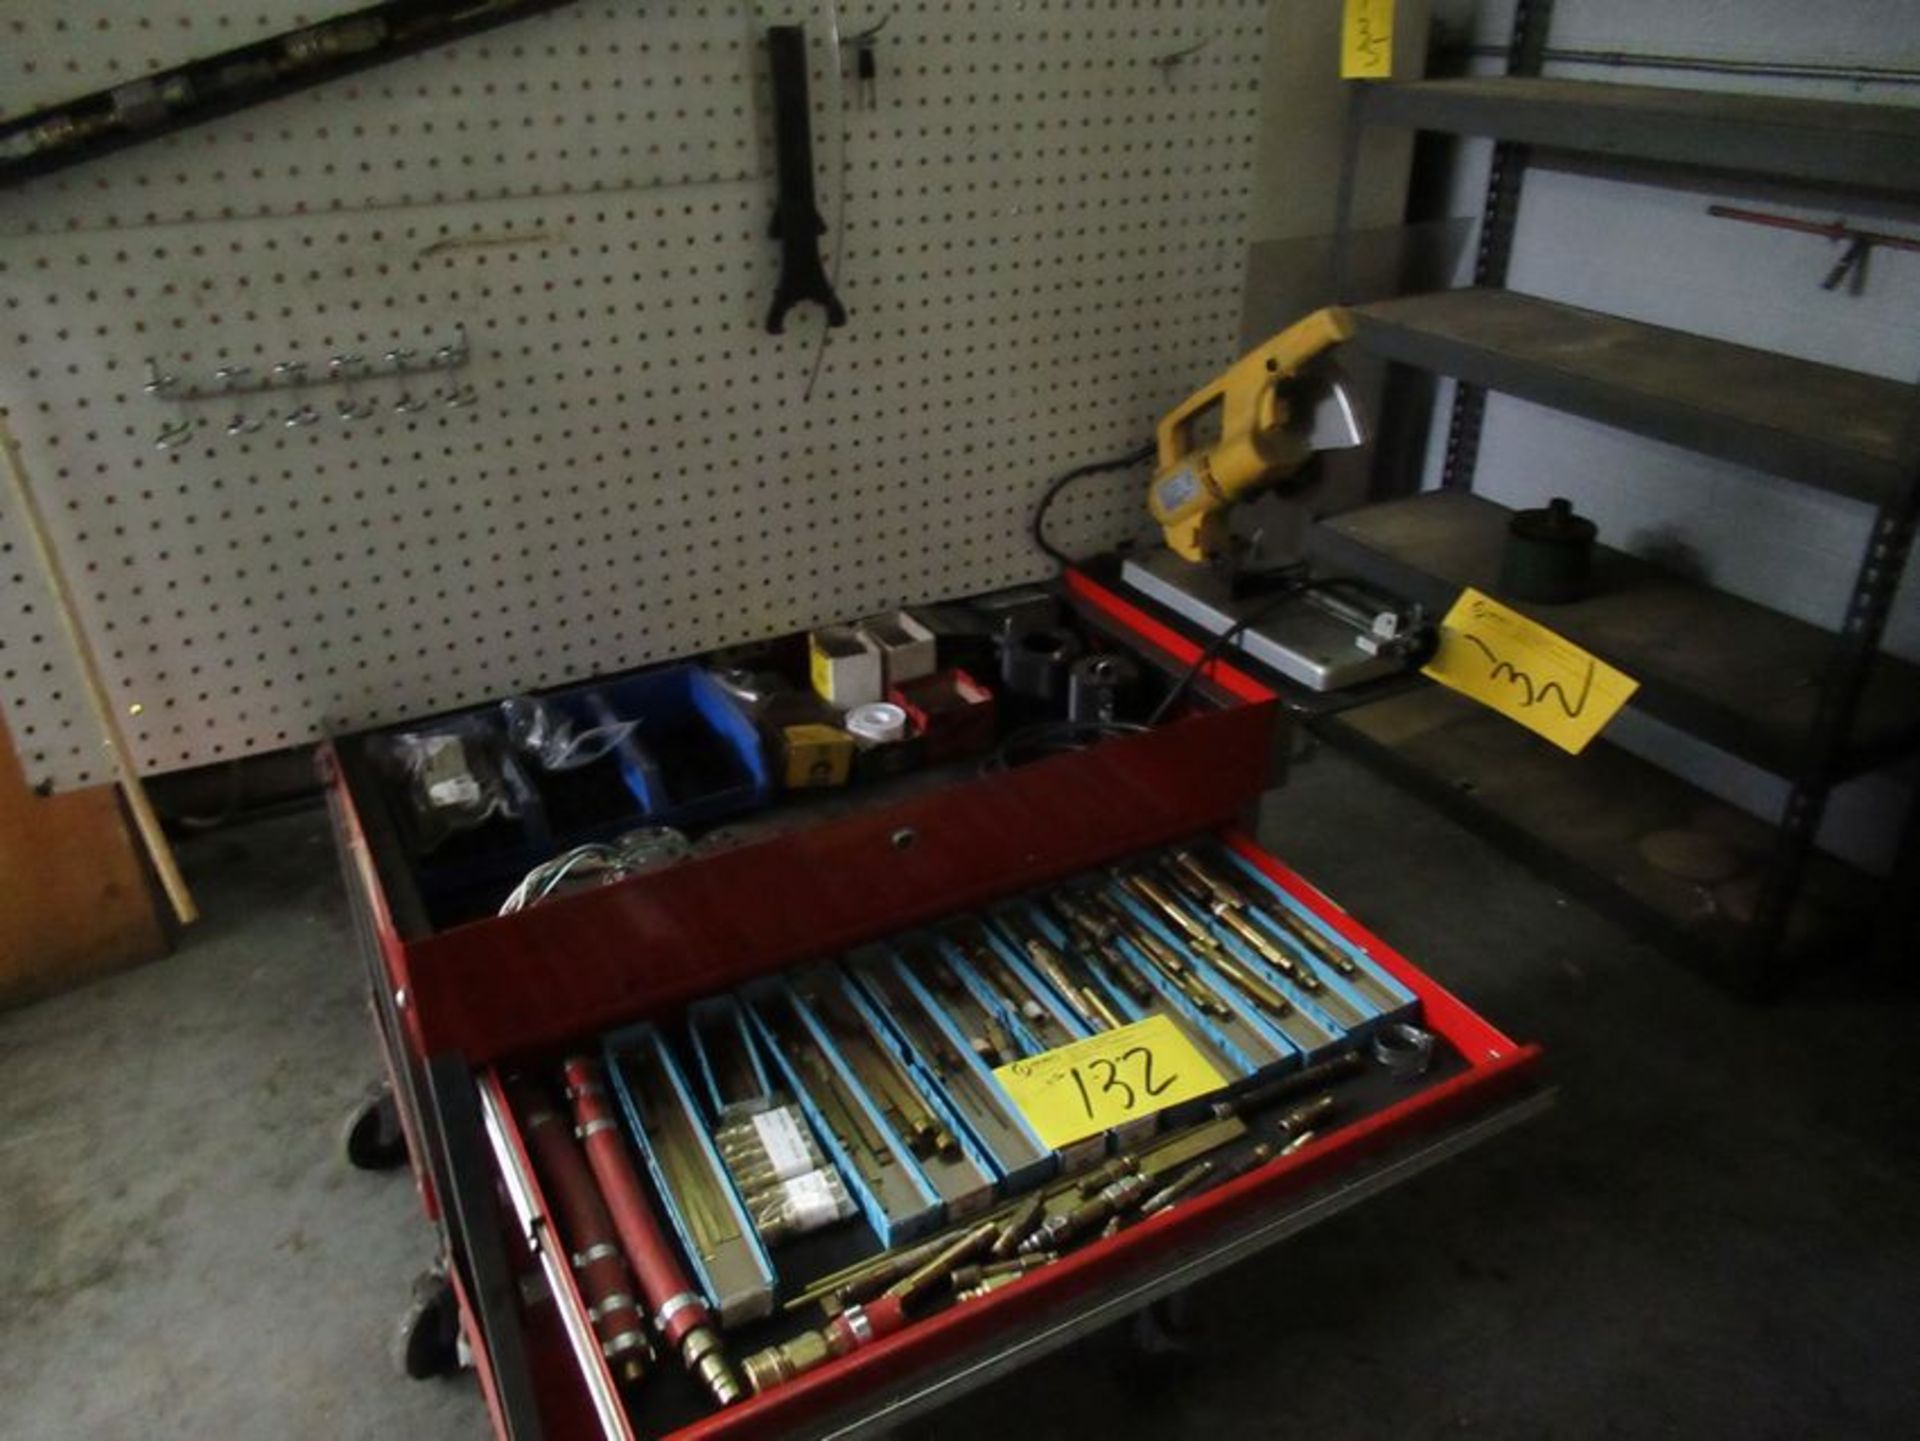 RED 3 DR. PORTABLE TOOL CART W/MOULD PIPING, POWERFIST J16-AJ-178 7" CUT SAW, ETC.